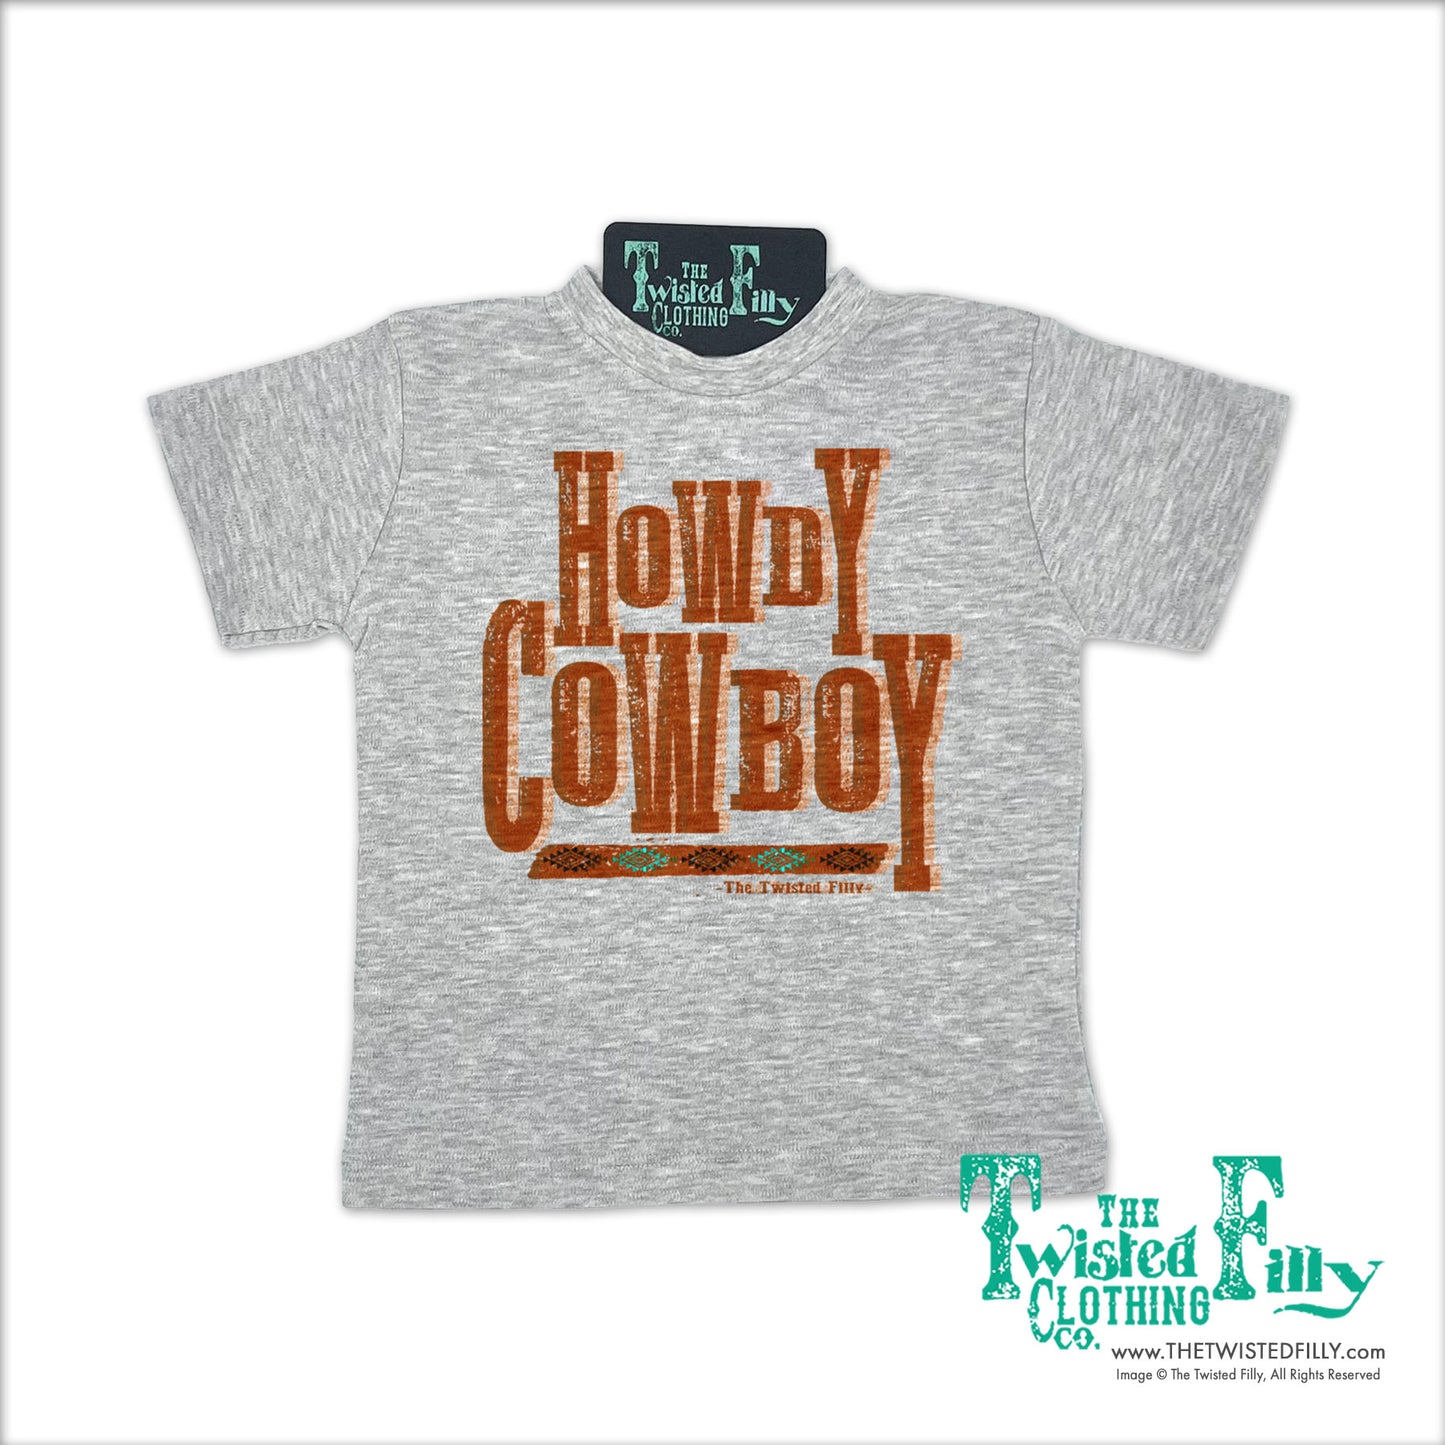 Howdy Cowboy  - S/S Girls Infant Tee - Assorted Colors